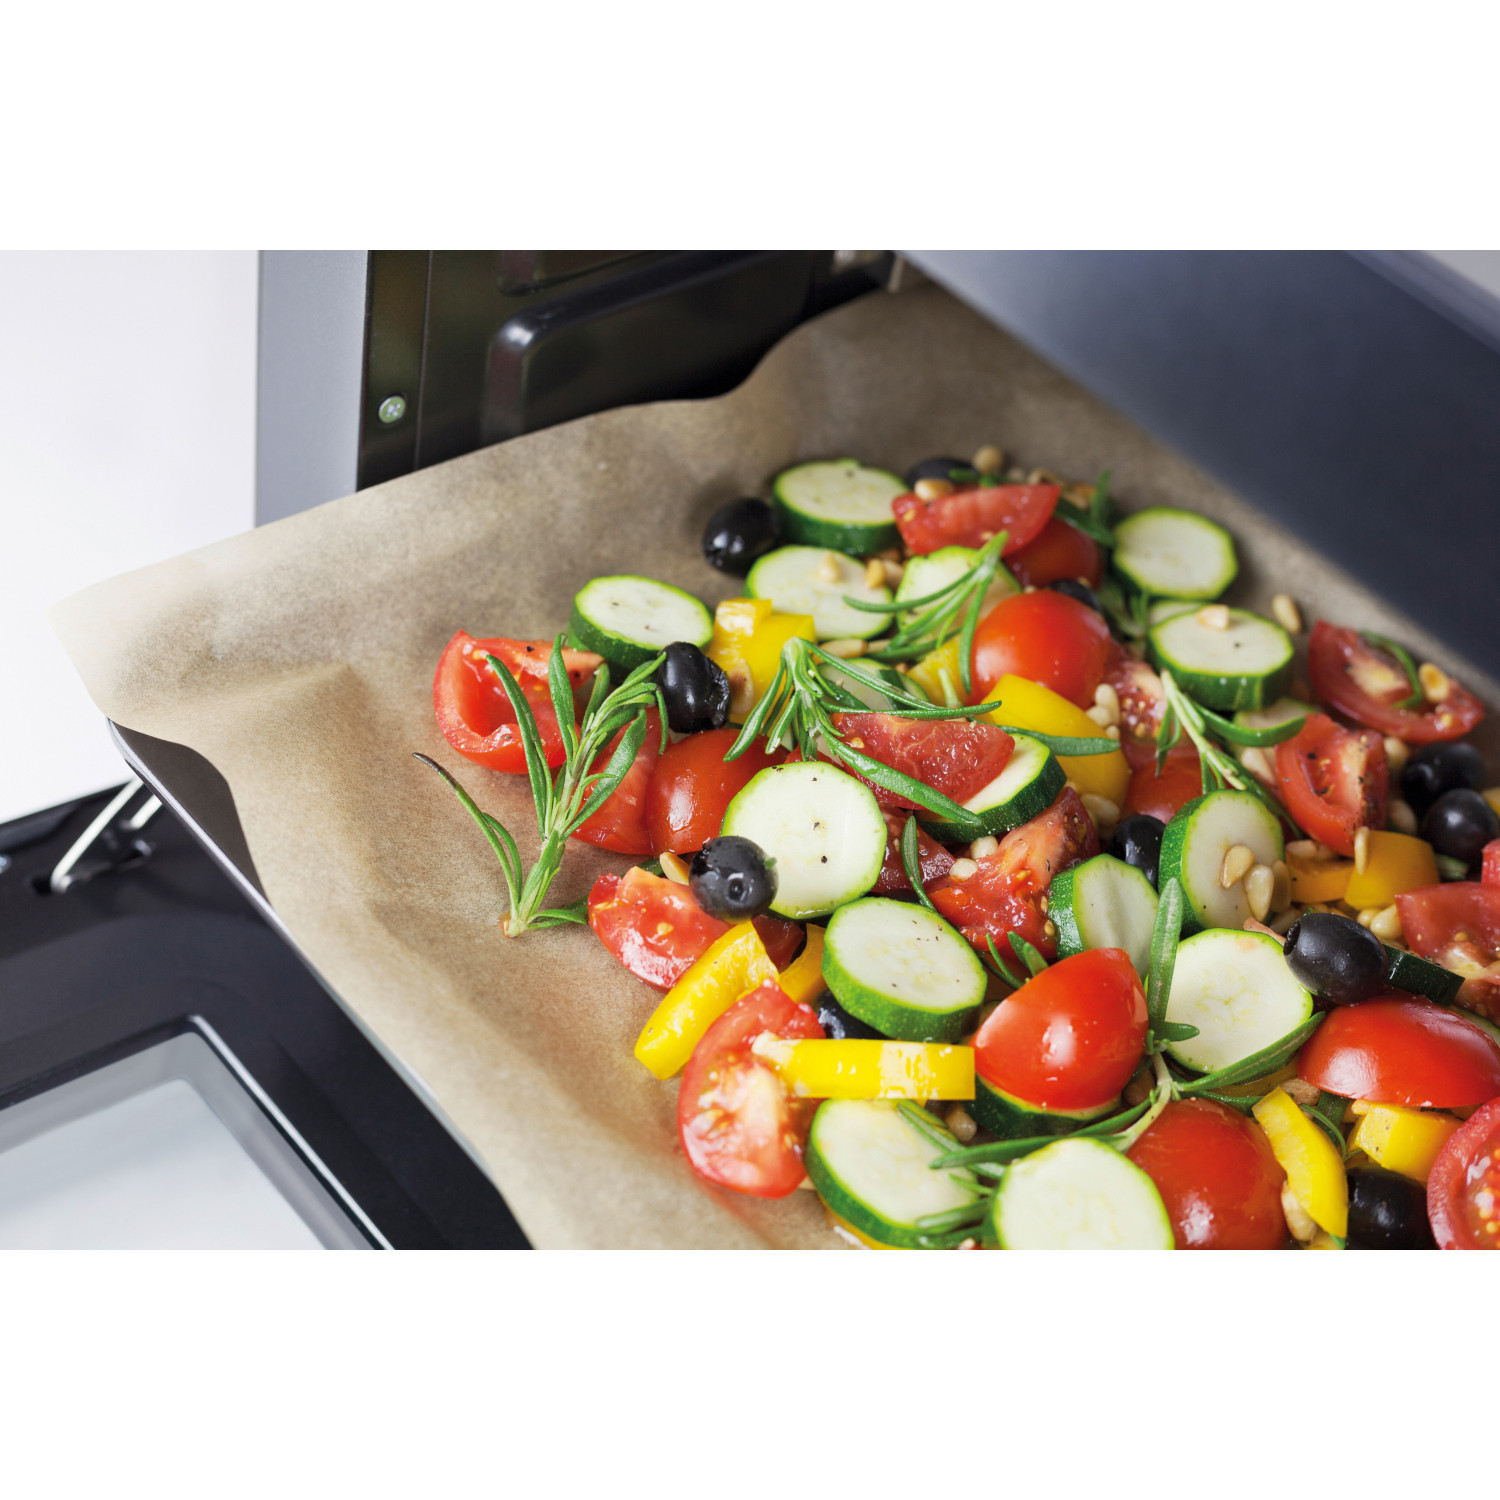 CASO TO 26 | electronic4you SilverStyle Mini-Backofen